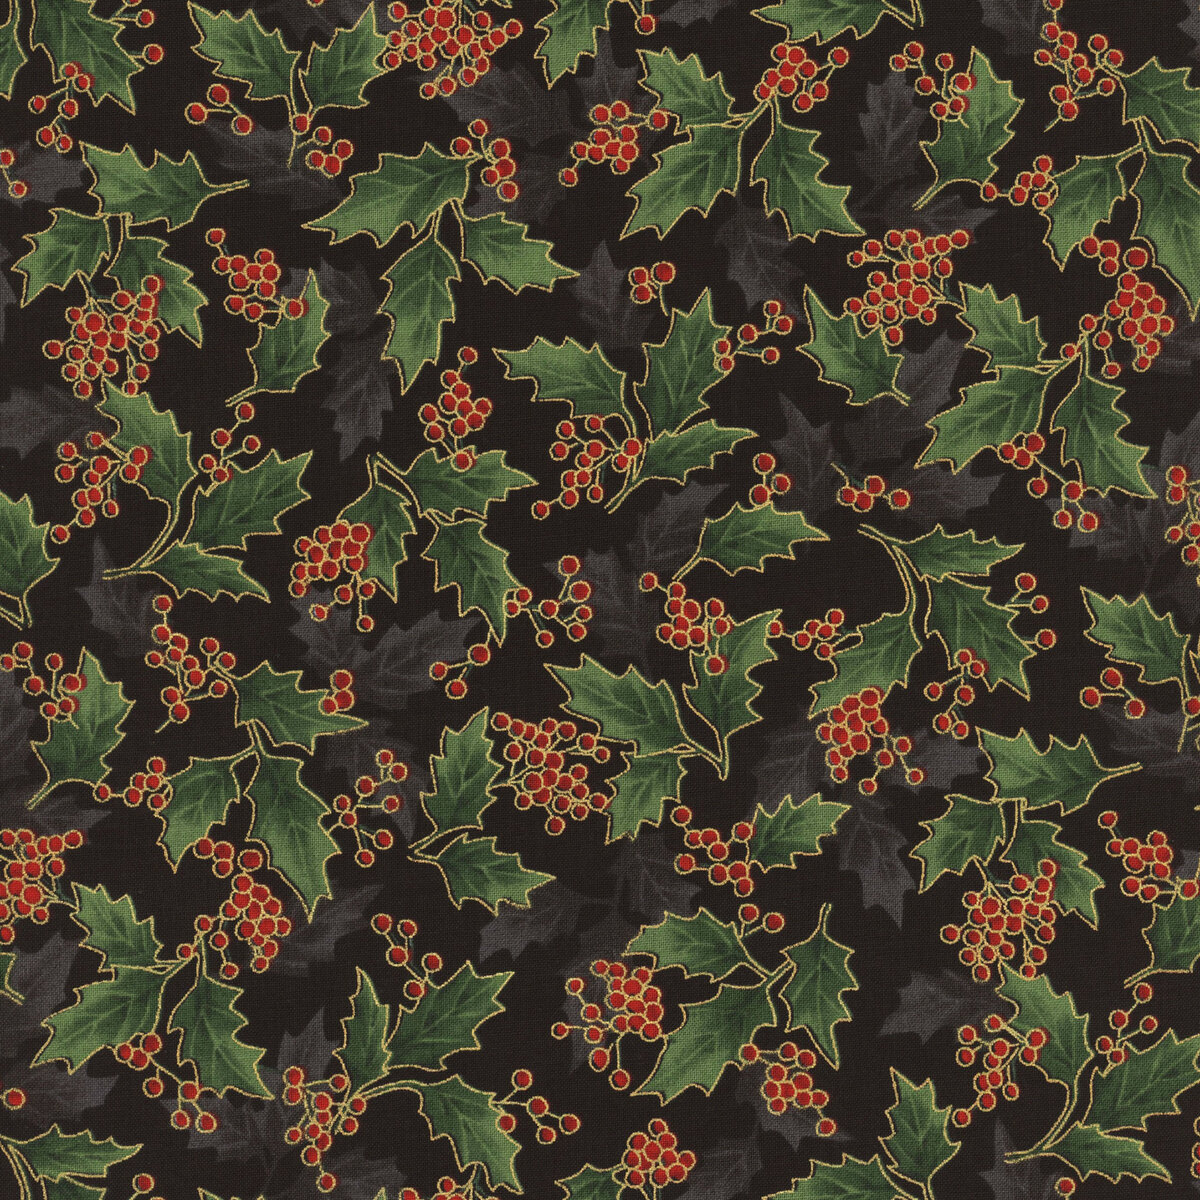 Cotton Quilt Fabric CHRISTMAS HOLLY Leaf Berry TOSS Green